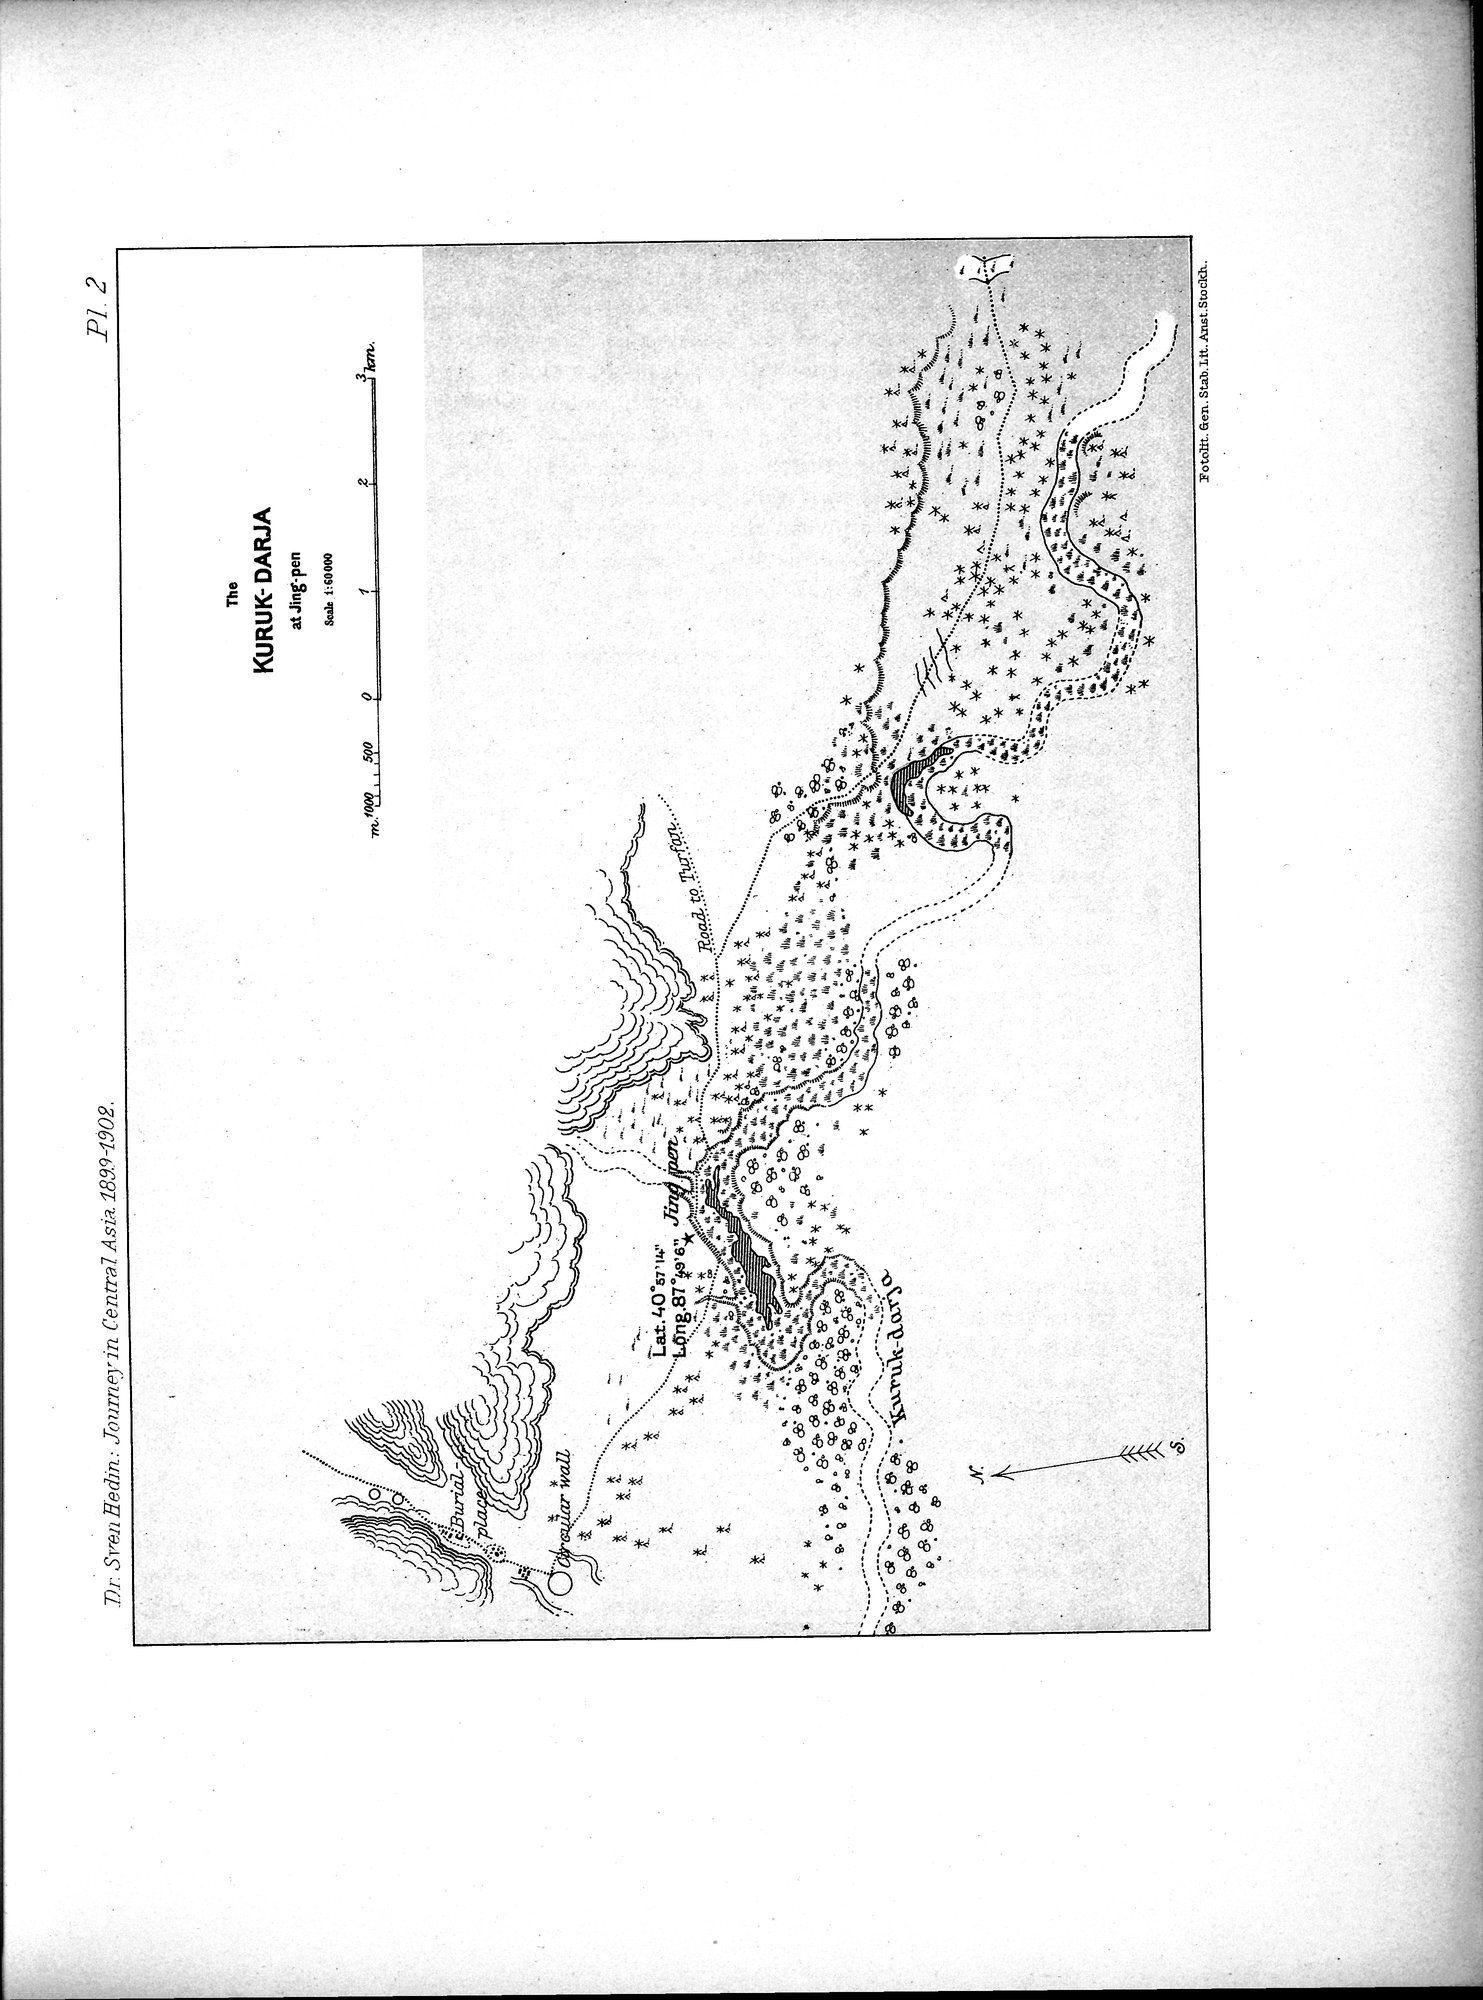 Scientific Results of a Journey in Central Asia, 1899-1902 : vol.2 / 51 ページ（白黒高解像度画像）